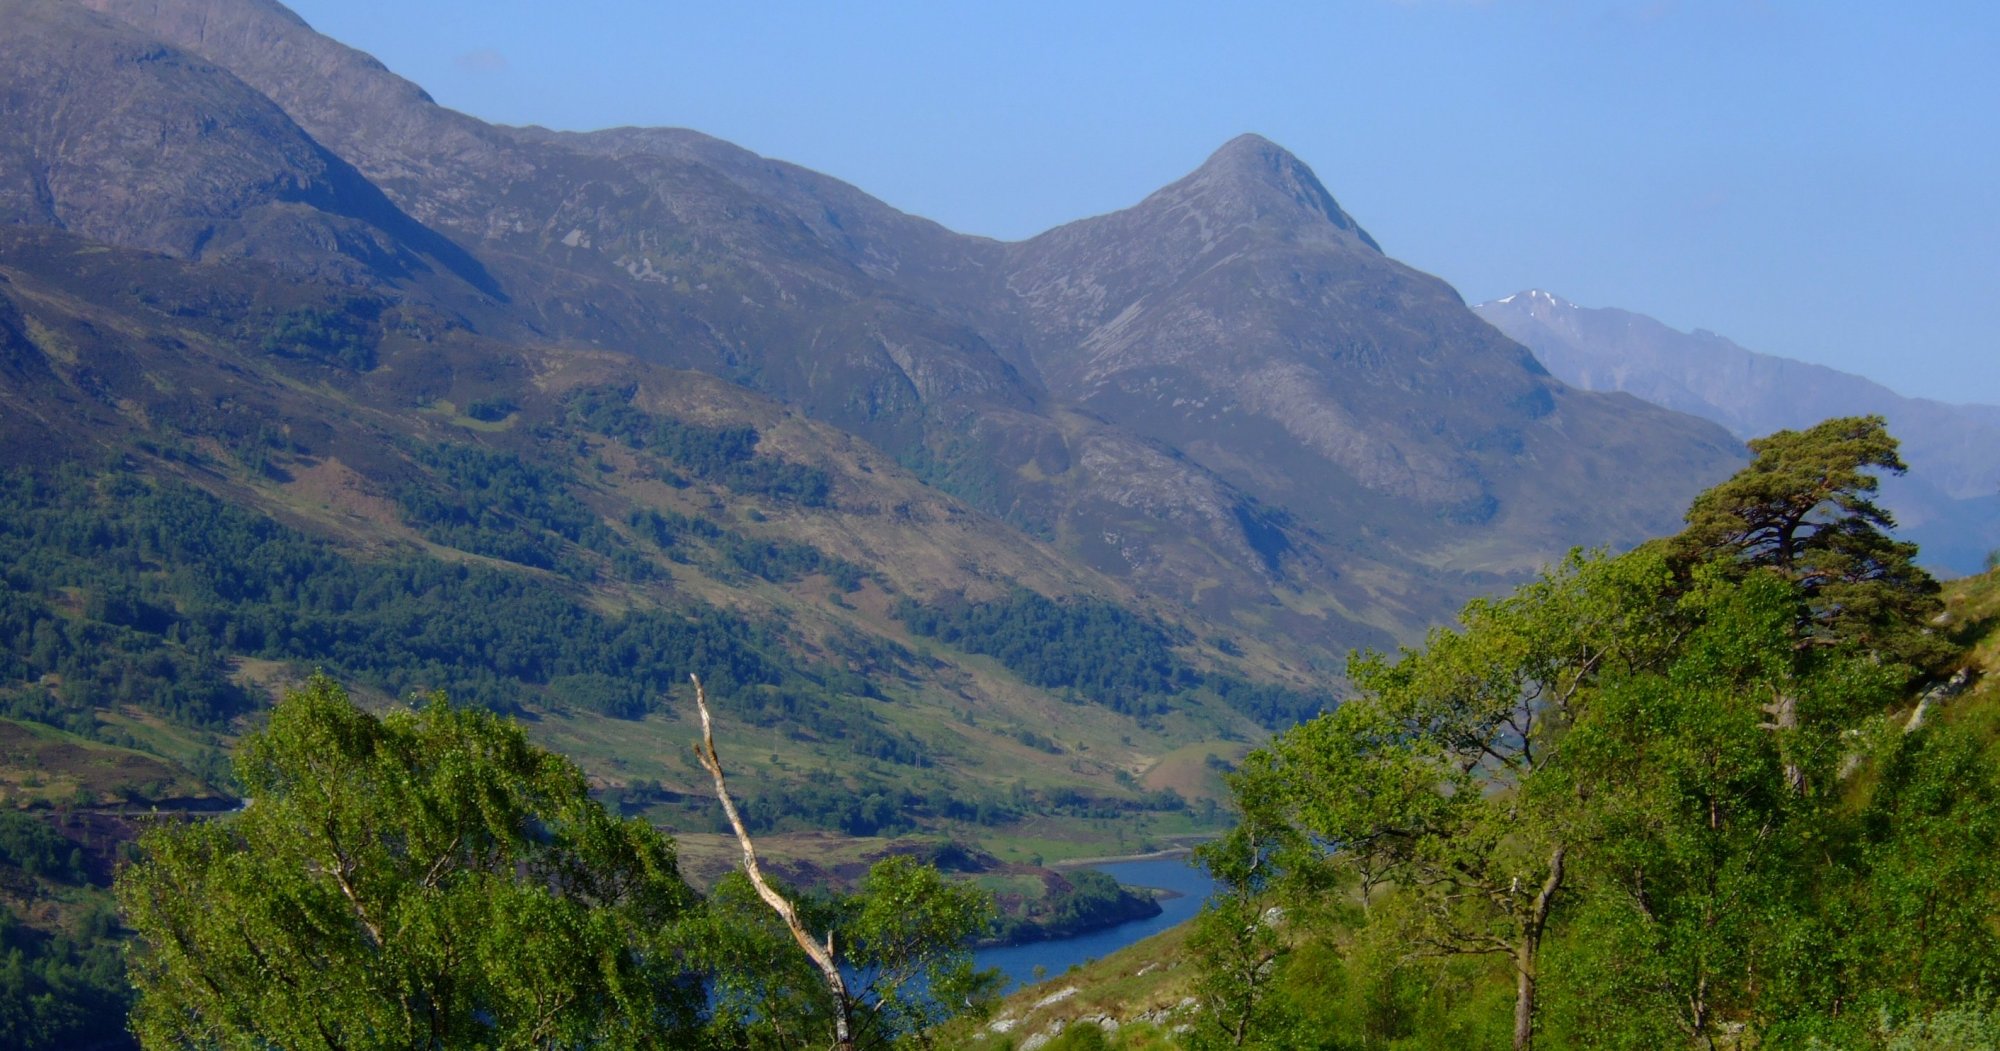 Loch Leven with the Pap of Glencoe looking like a proper mountain